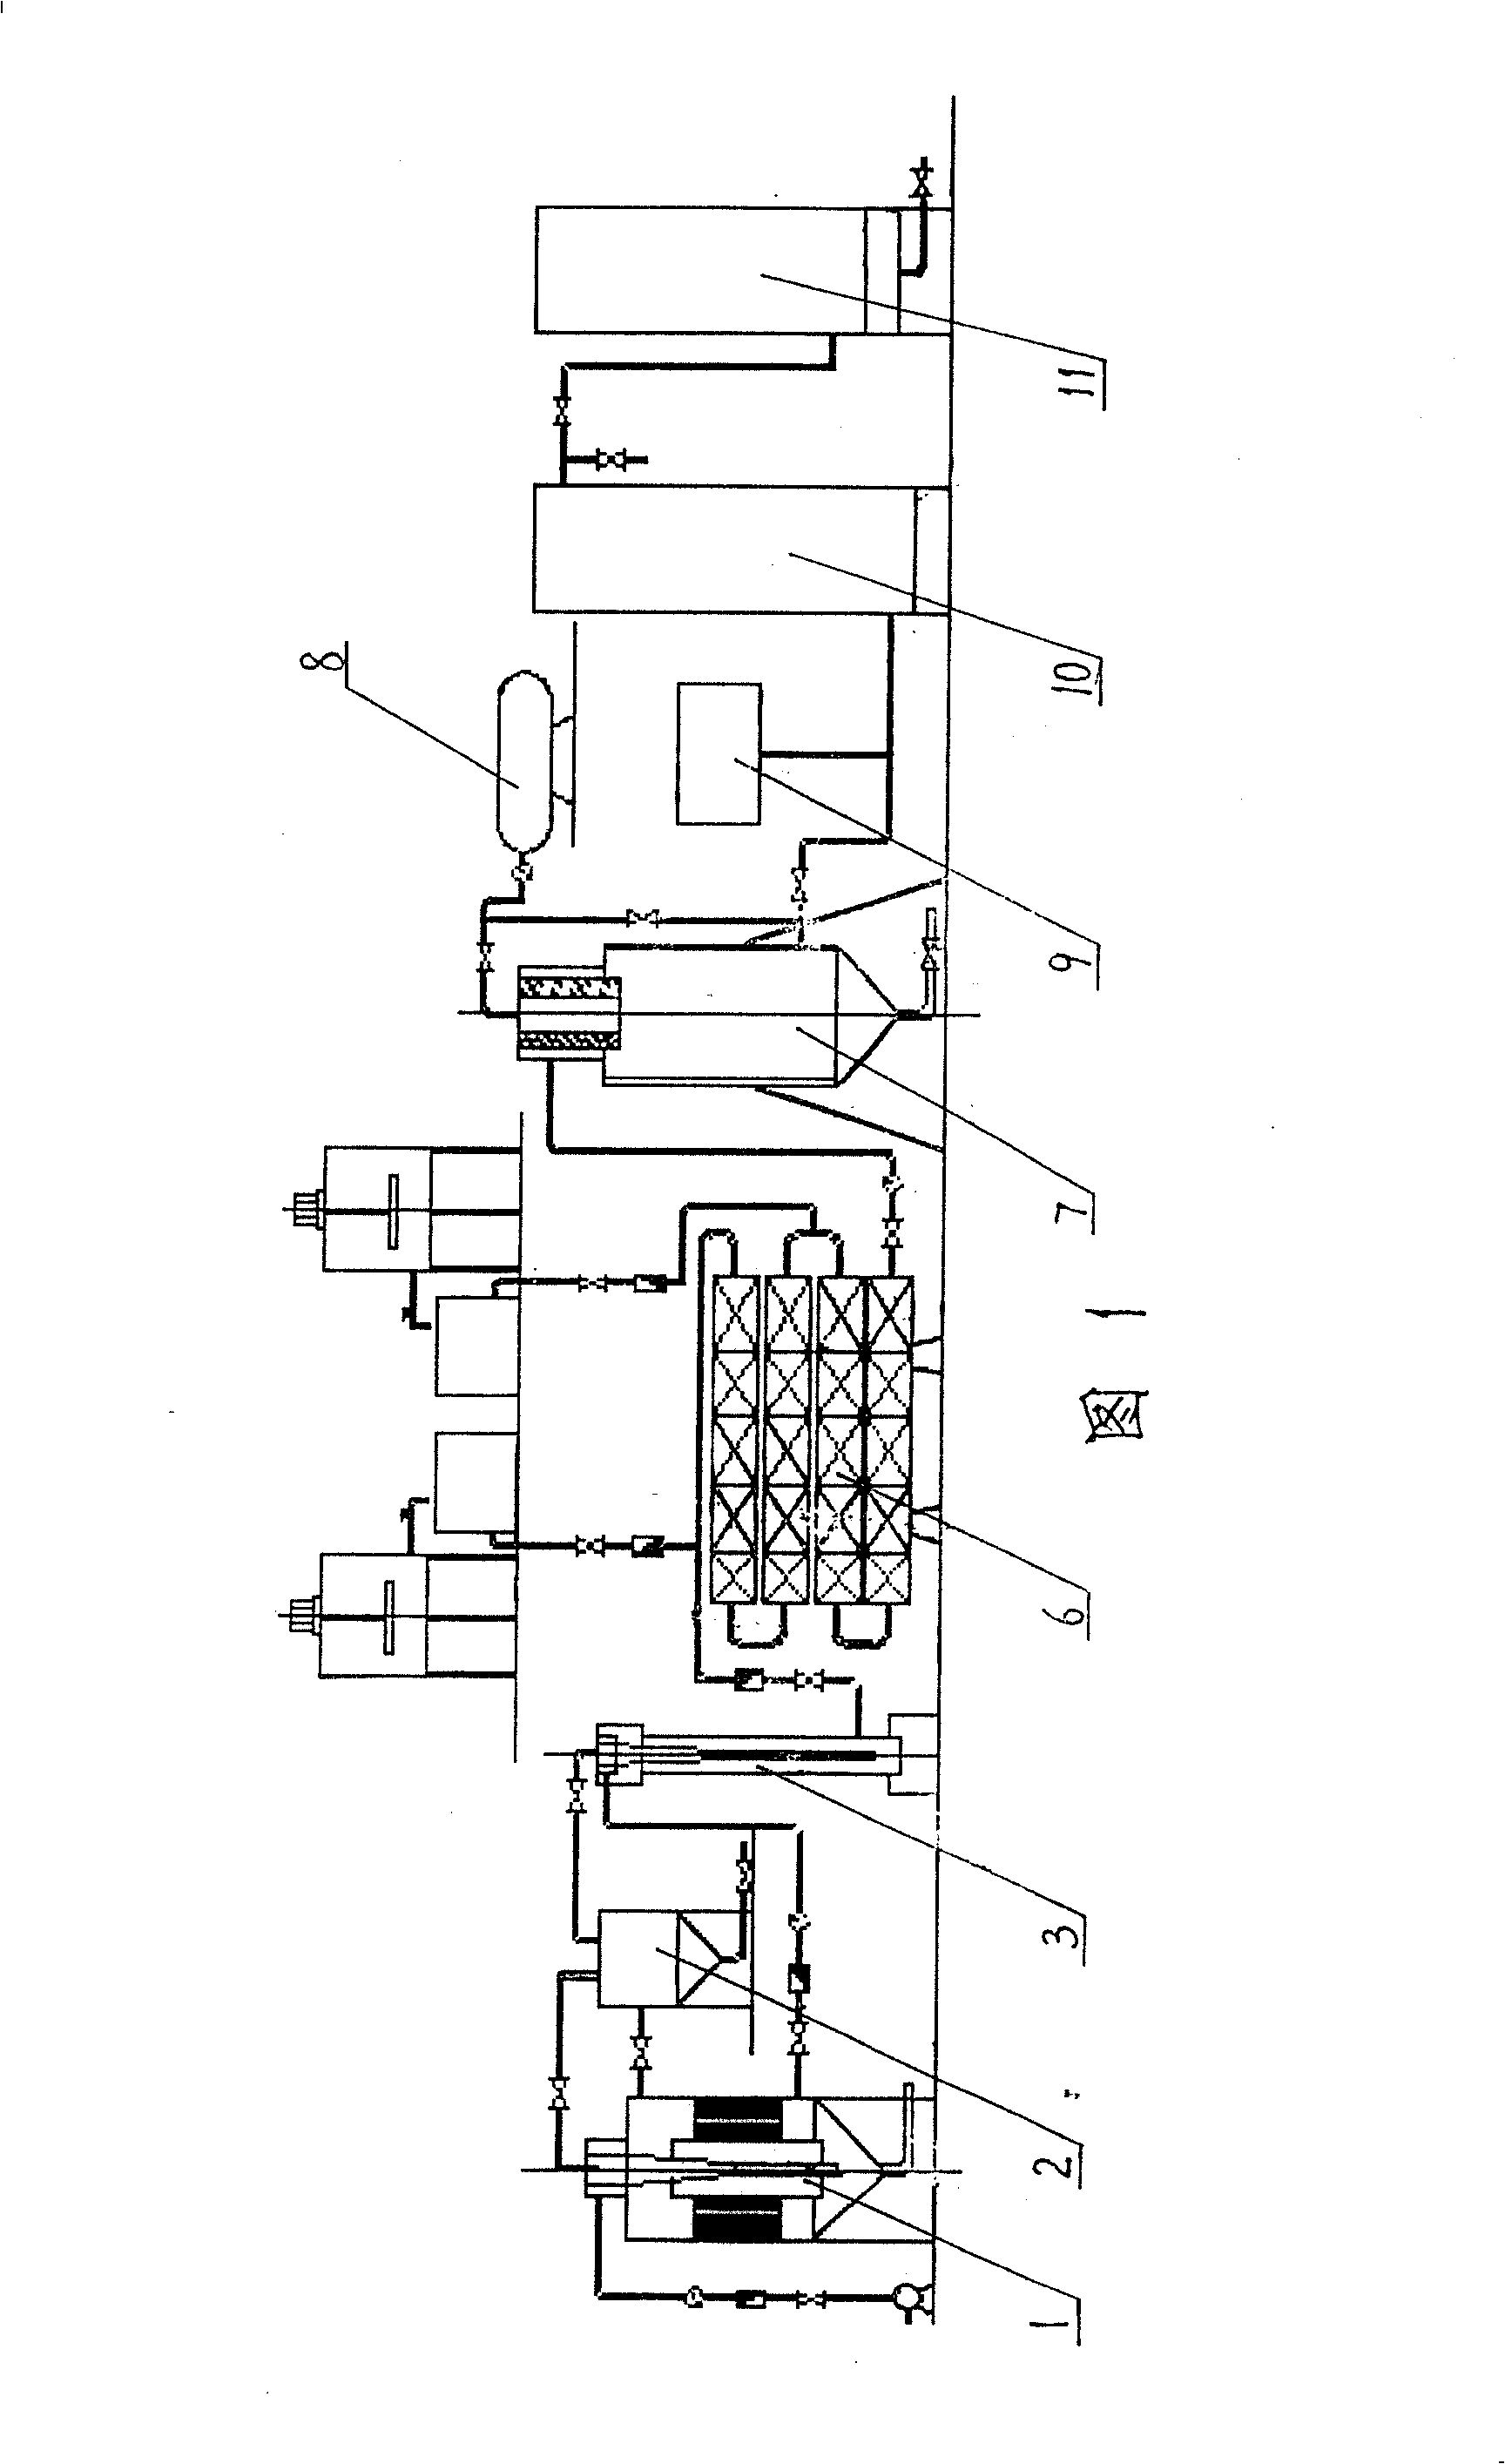 Process for assistant chemical treatment of oil field sullage rotational flow